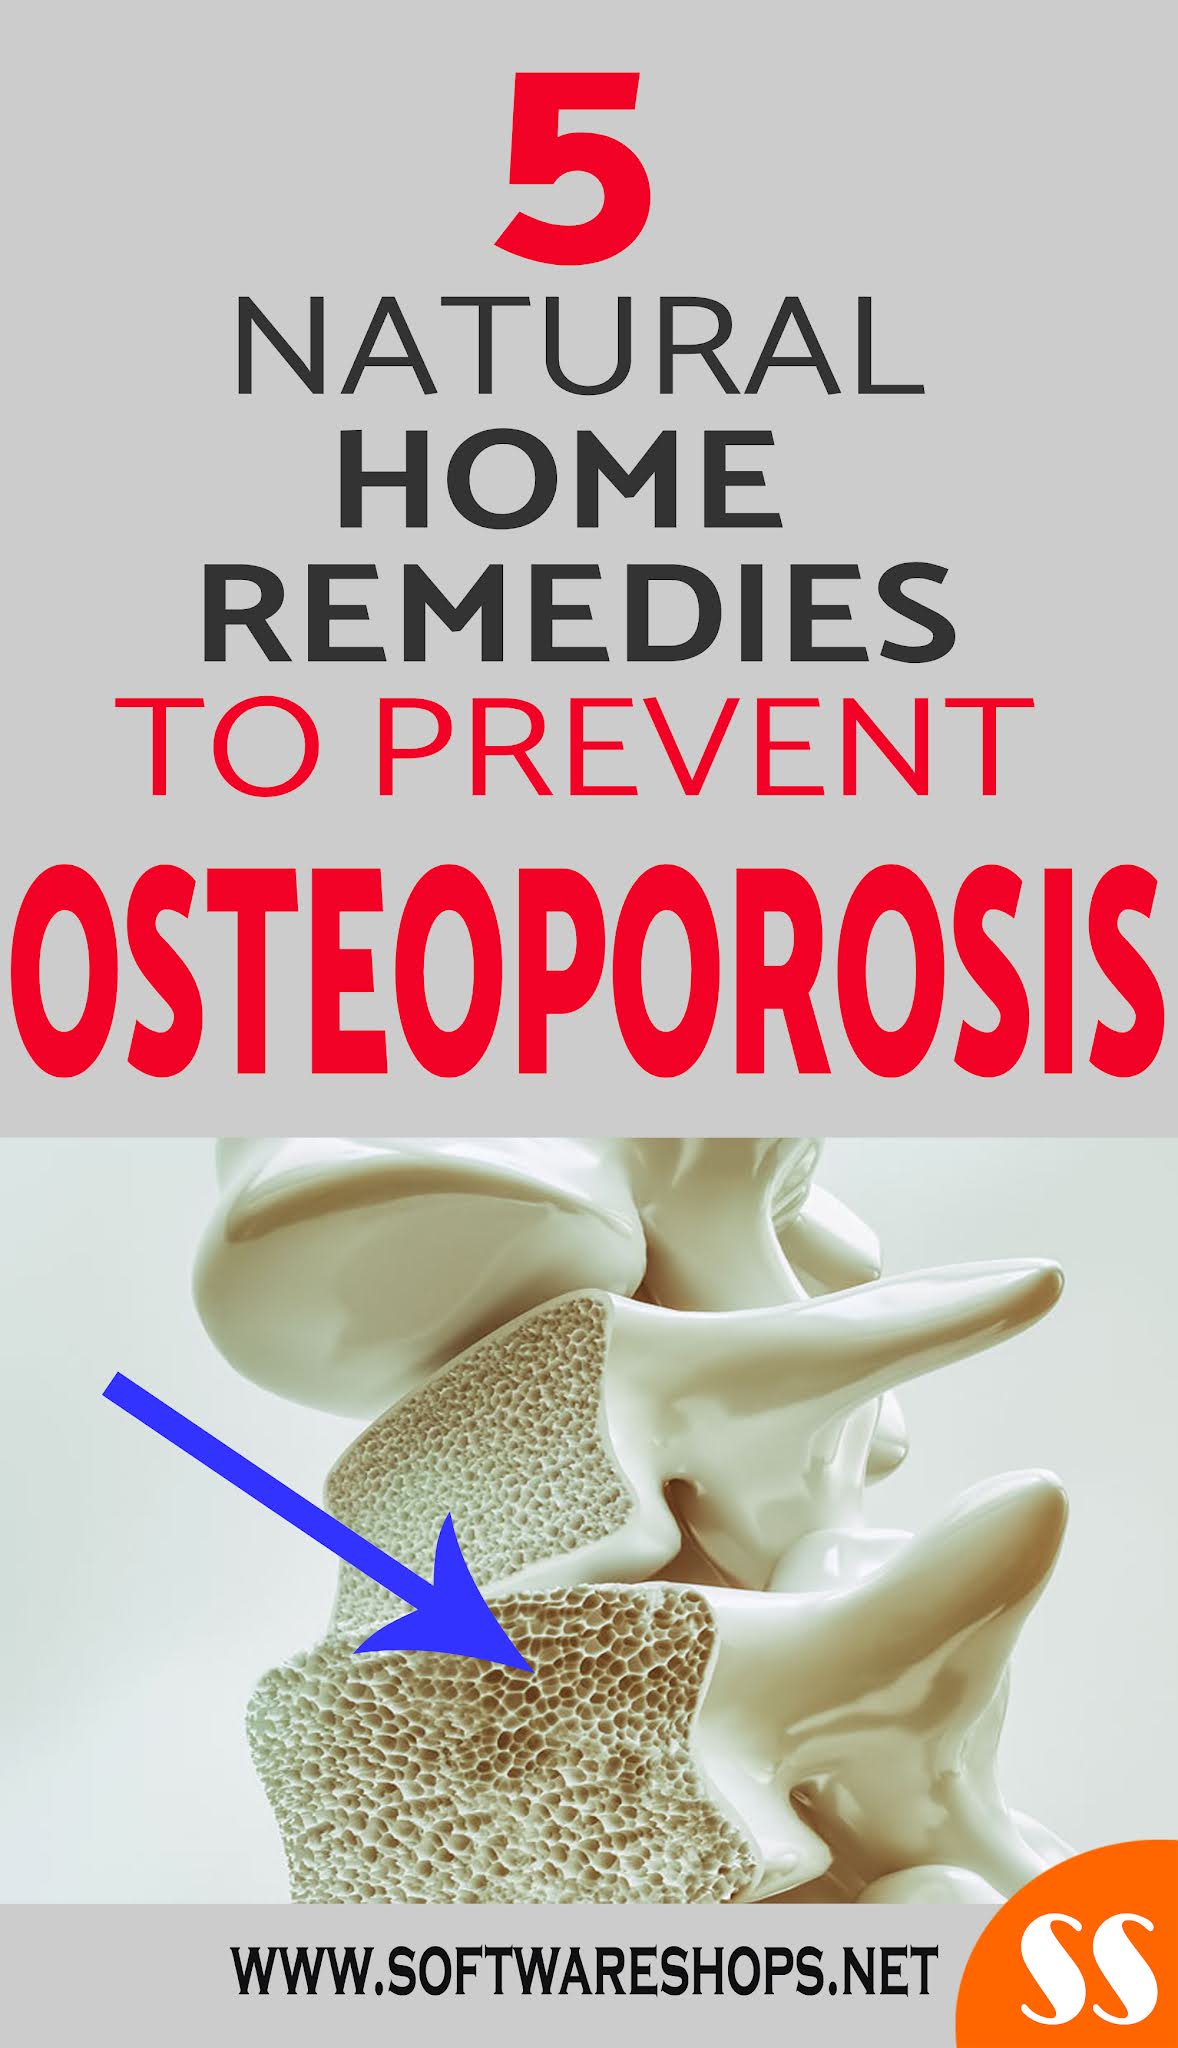 5 NATURAL REMEDIES TO PREVENT OSTEOPOROSIS